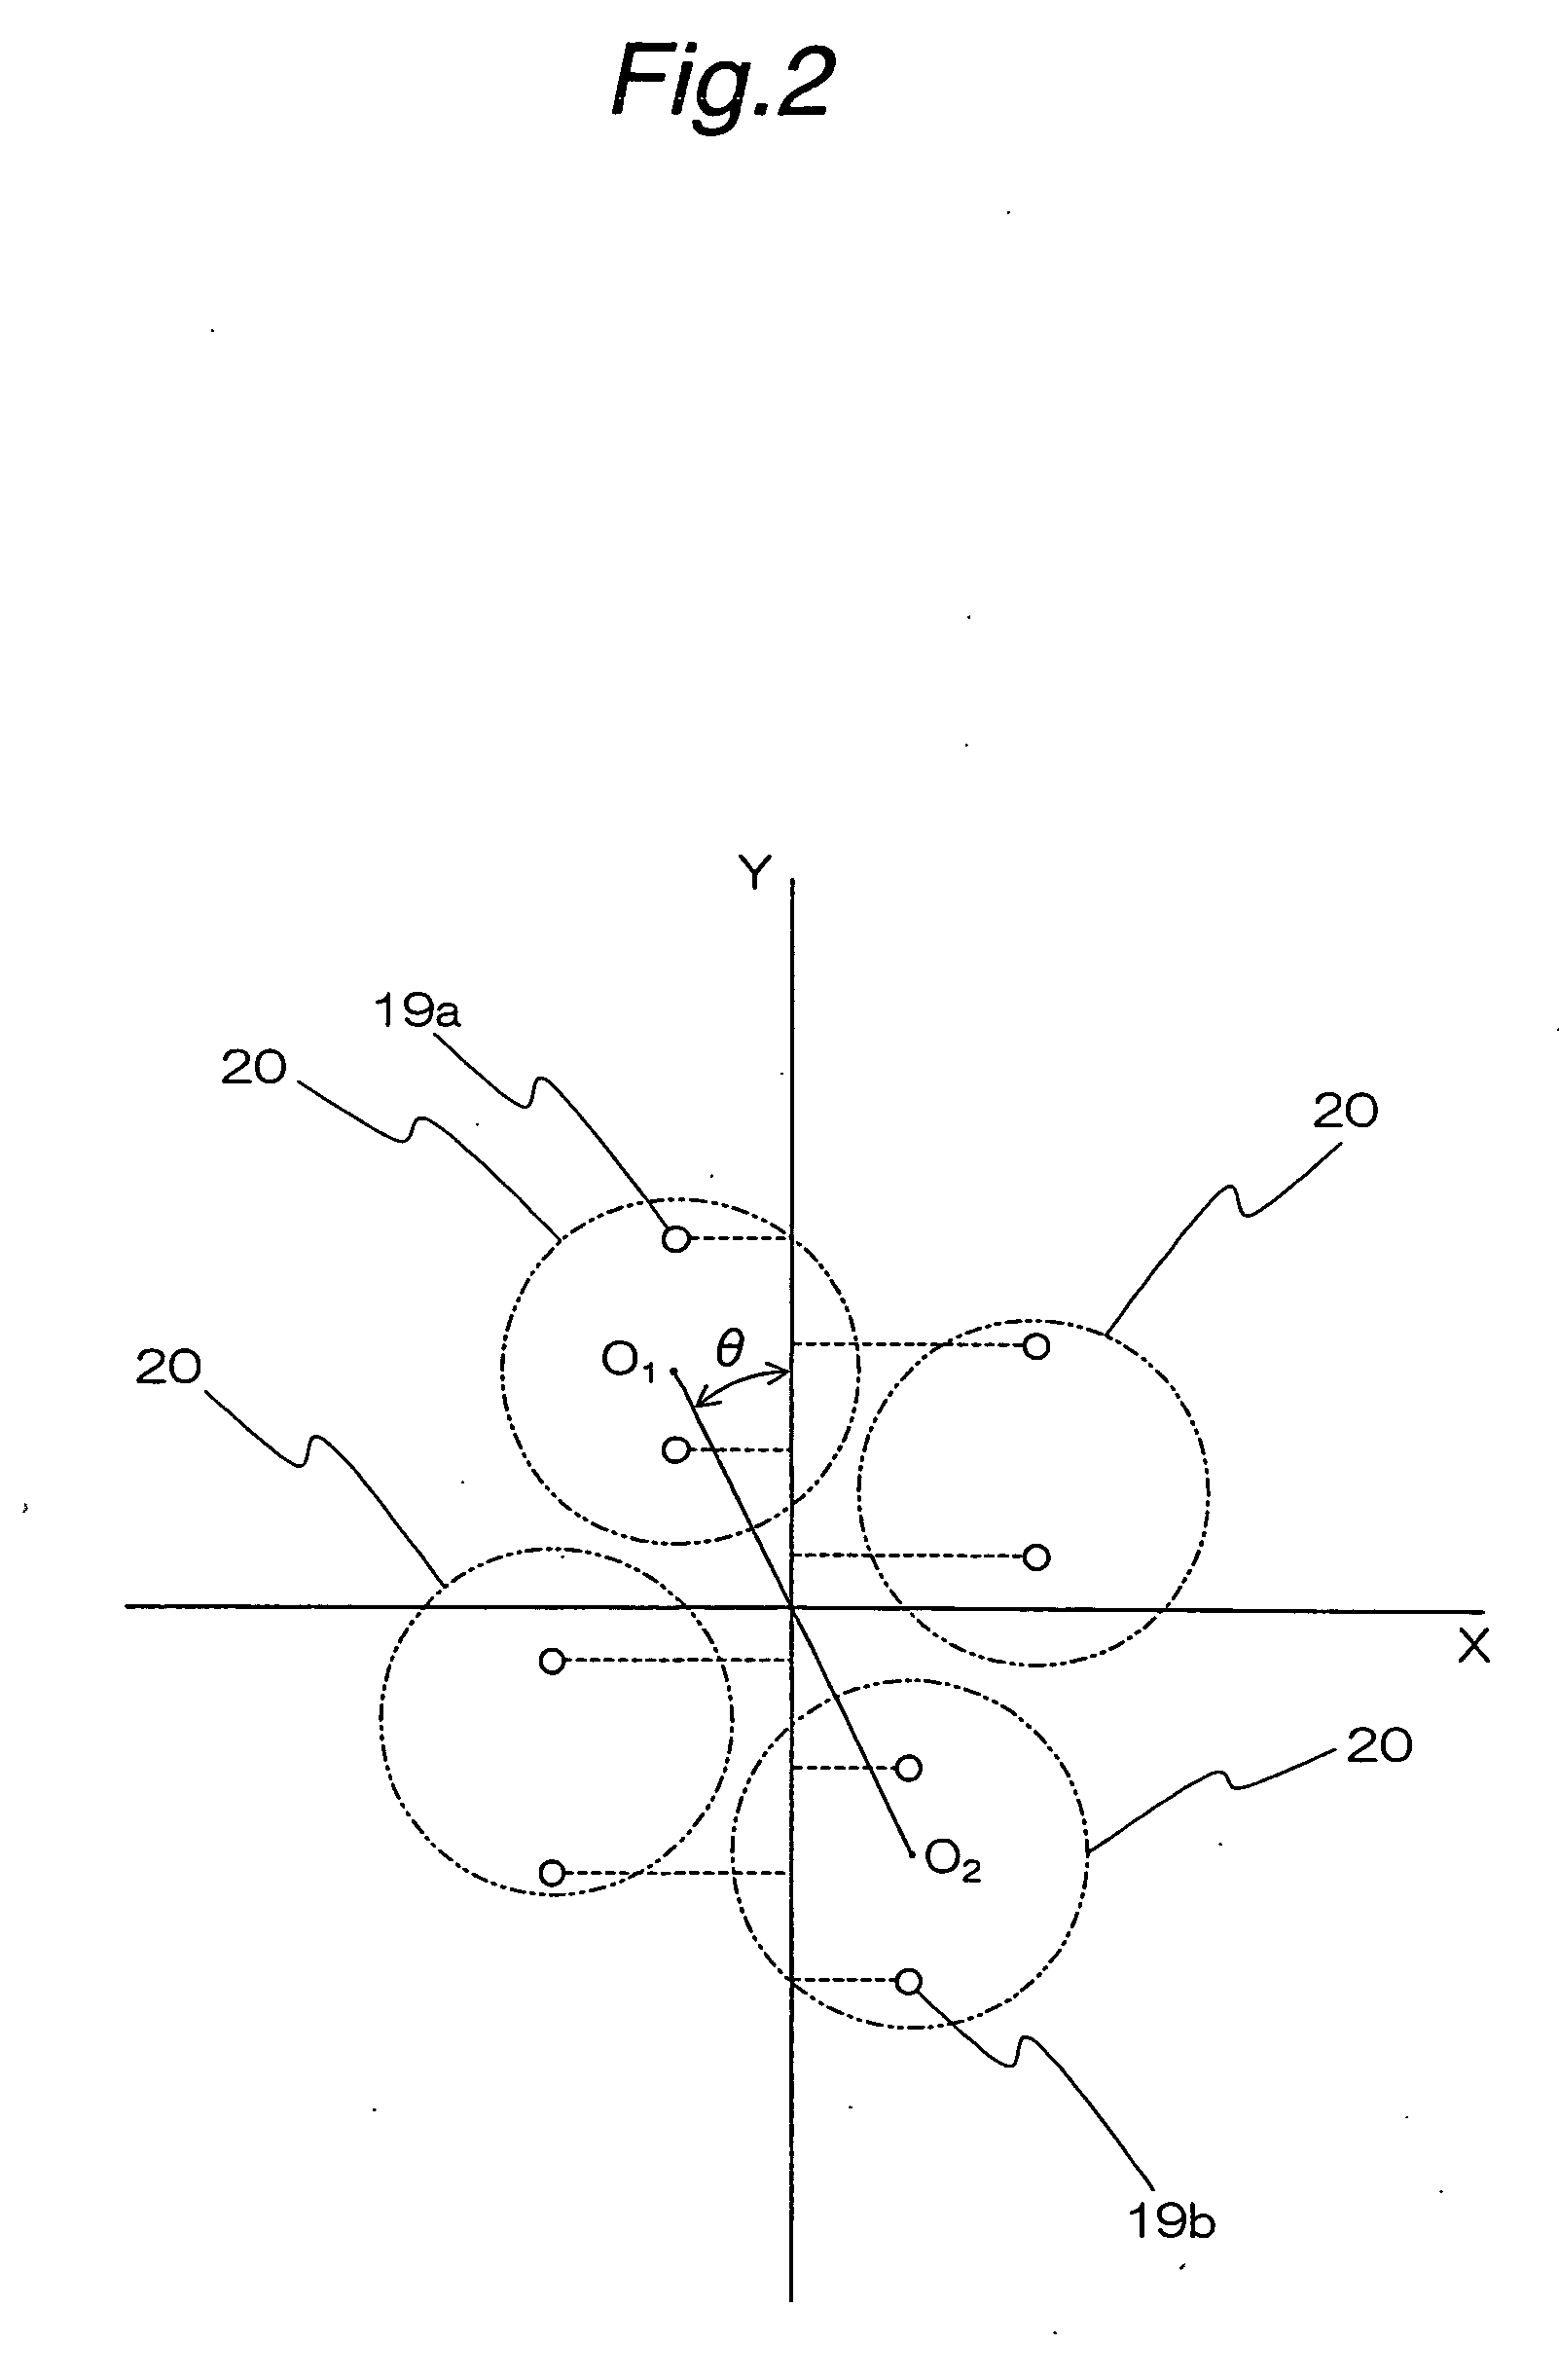 System and method for evaluation using electron beam and manufacture of devices